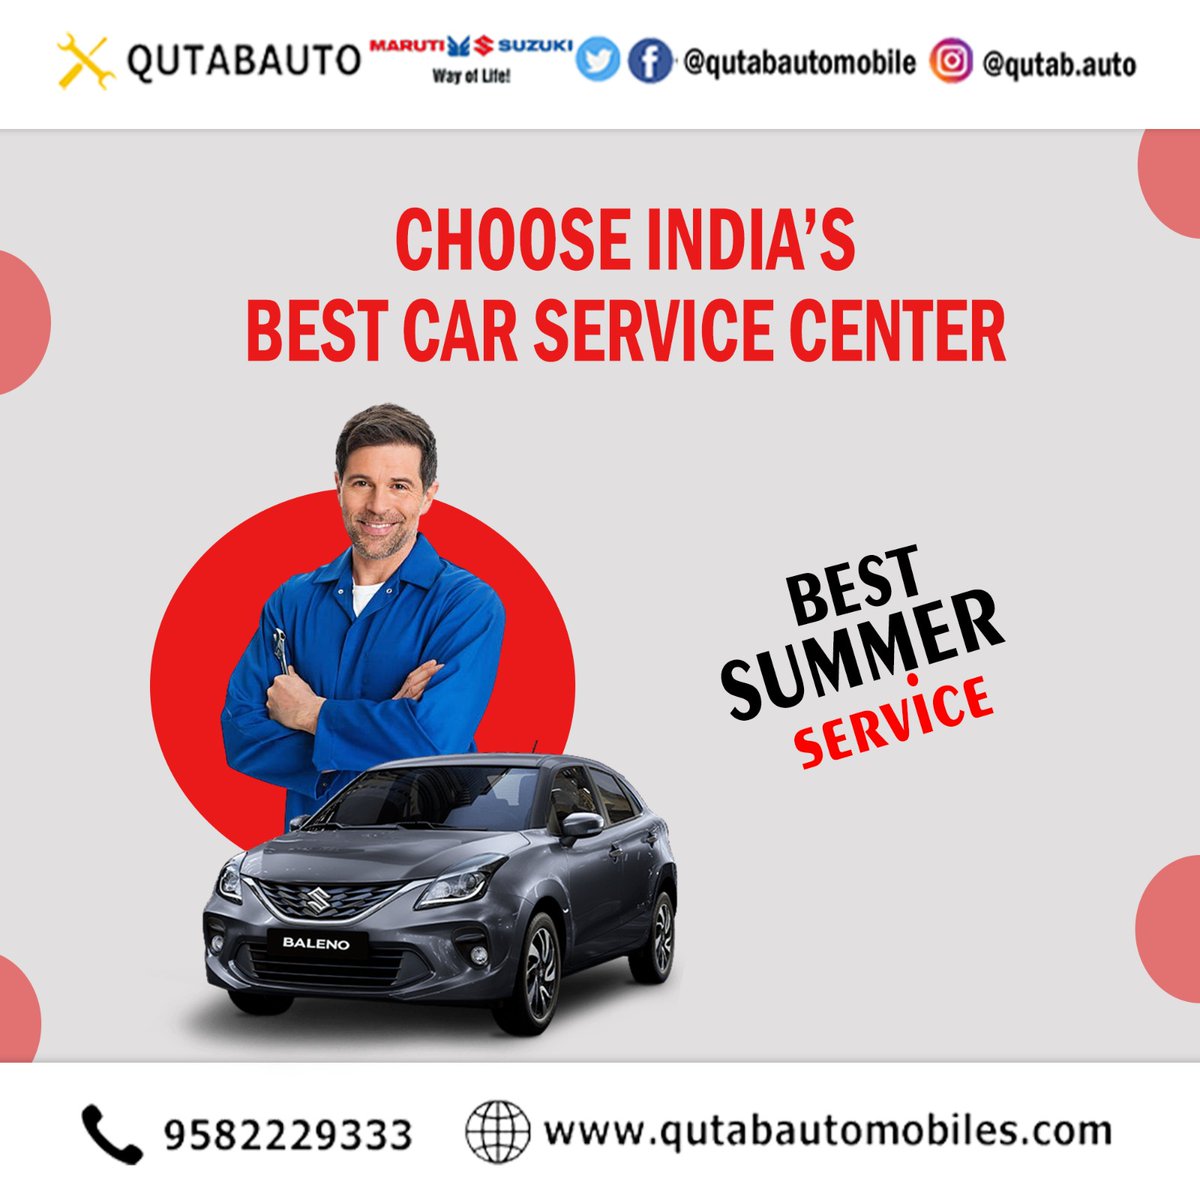 Where excellence meets your engine. Trust the best car service centre for top-notch care and performance. 
.
For more details contact us: 9582229333
Or visit our website: qutabautomobiles.com
.
.
#carservices #carservice #cars #carcare #automotive #carrepair #carmaintenance